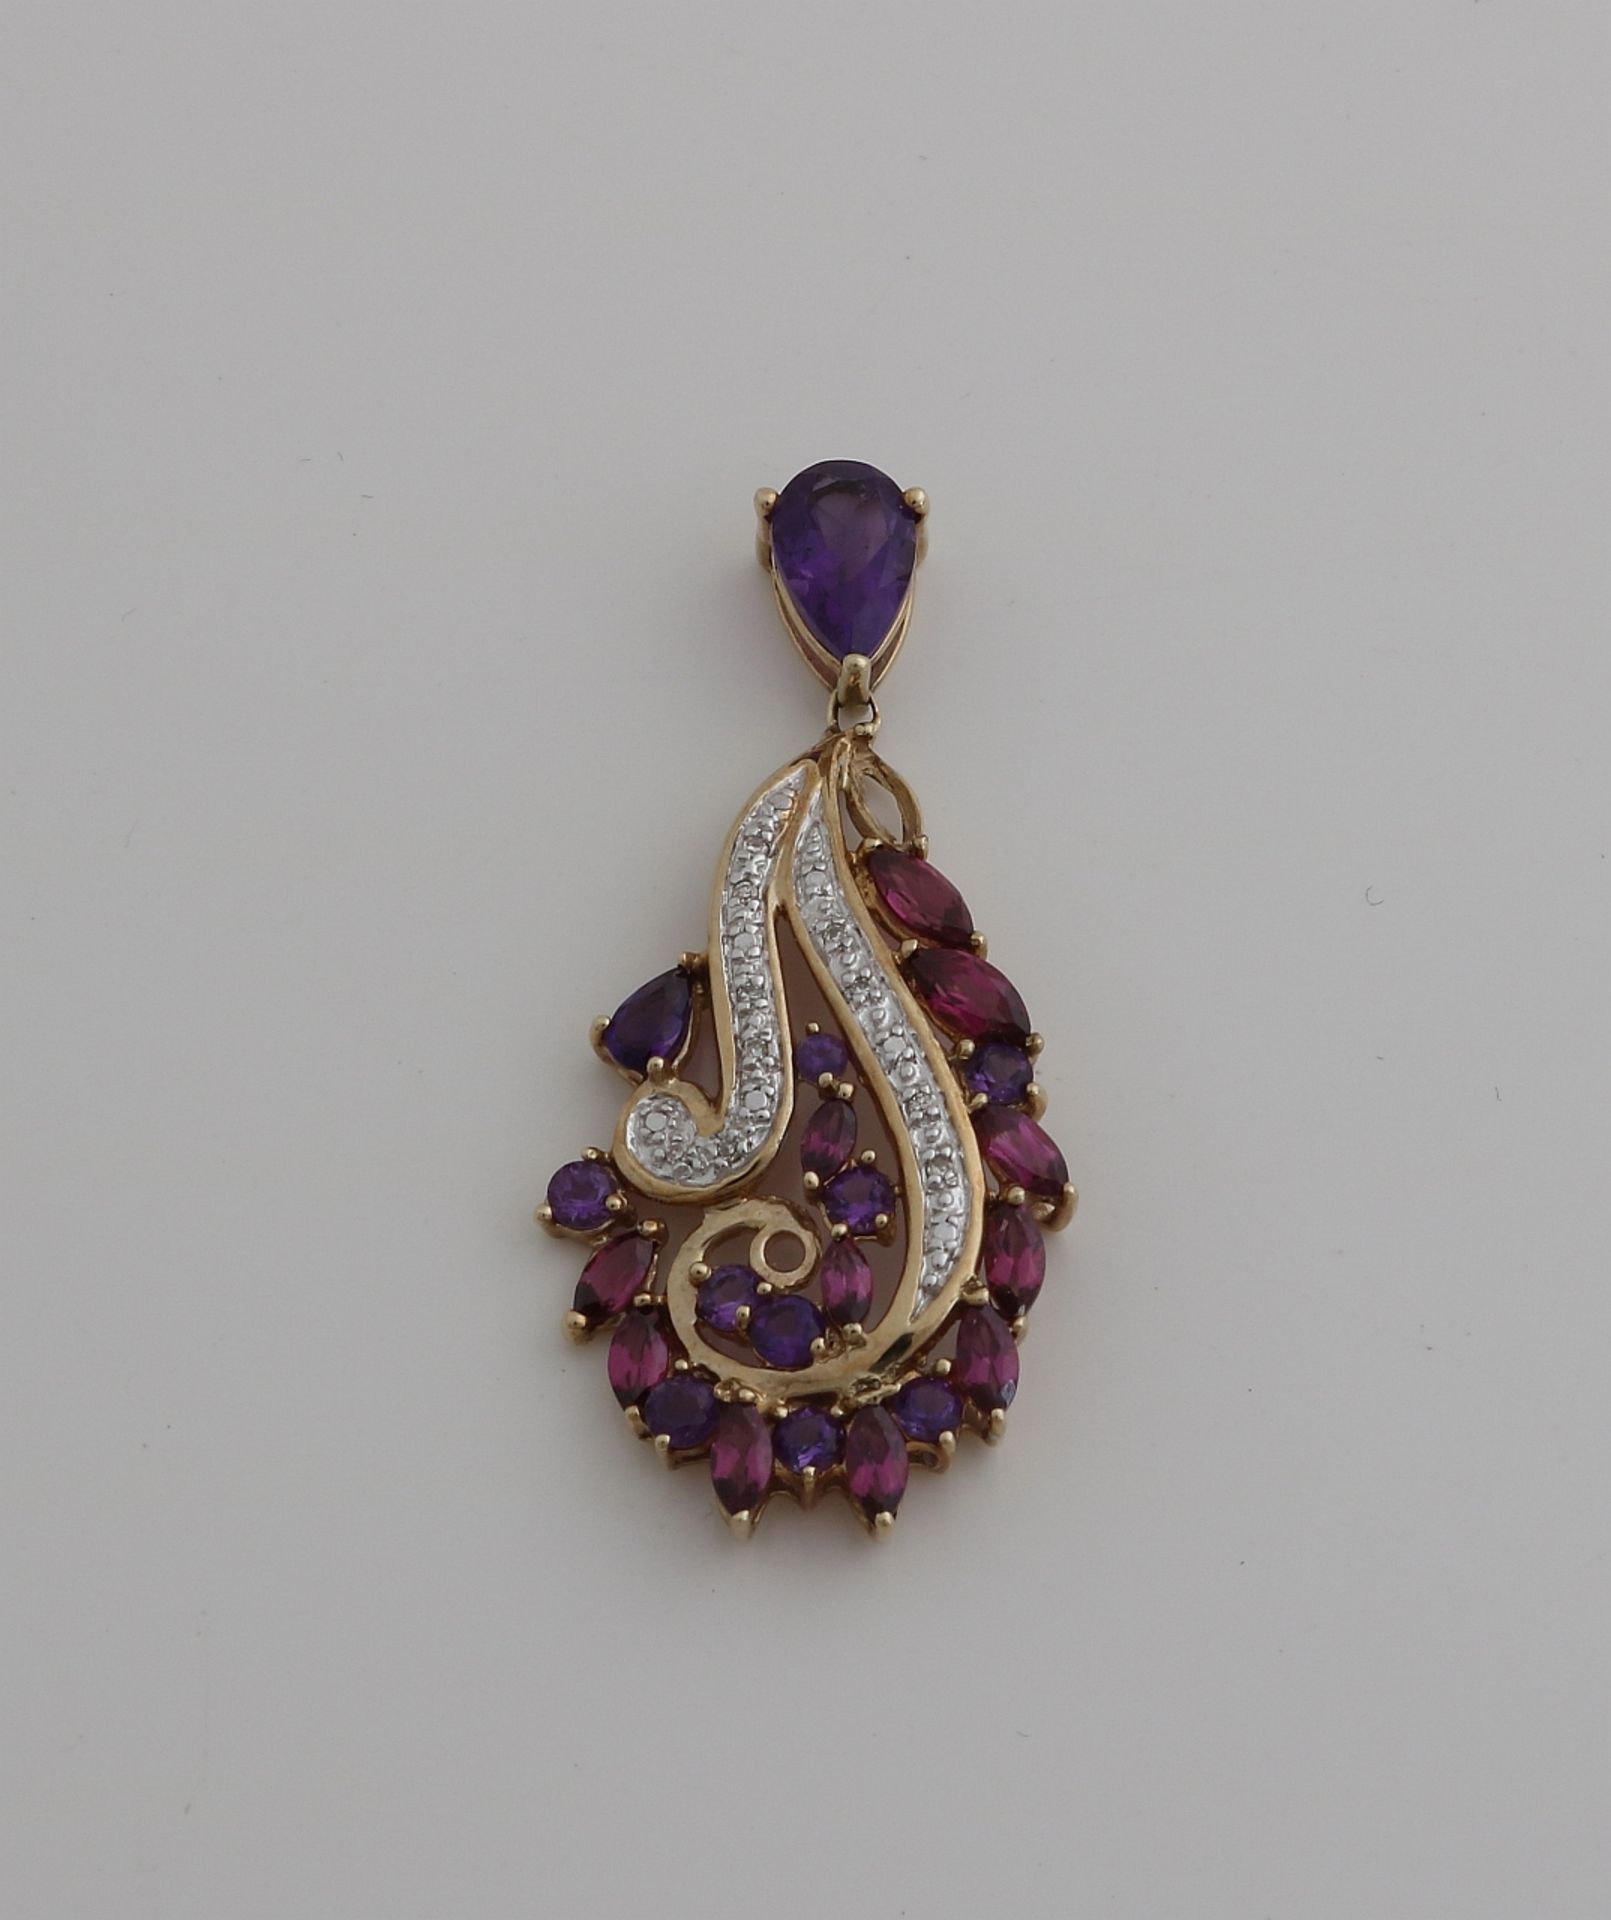 Pendant with amethyst and diamond